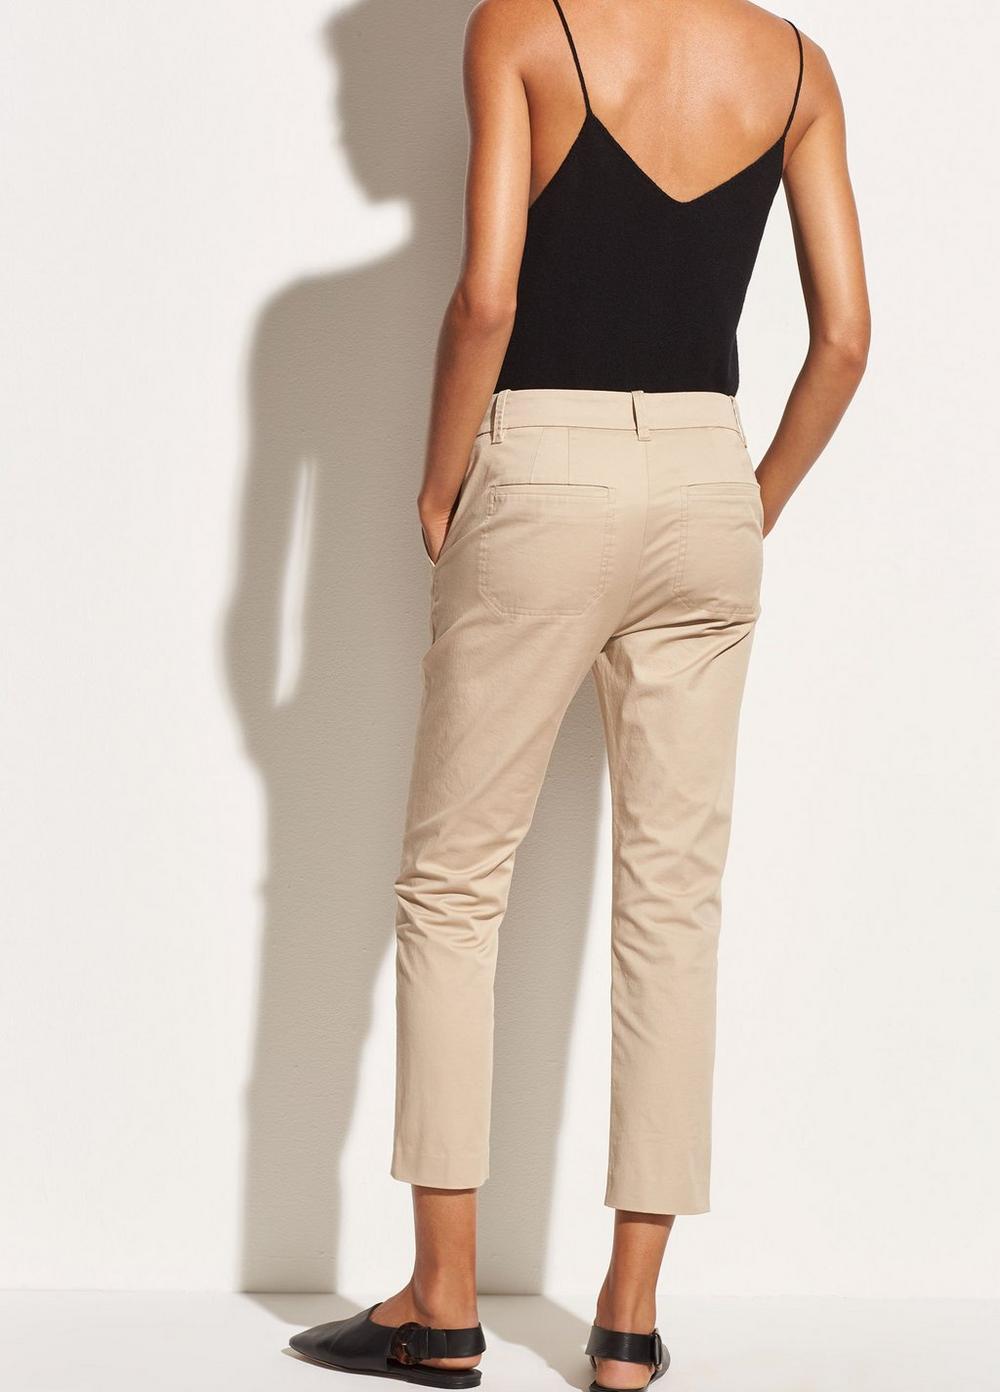 NWT Vince Solid Chino Trouser Pants Cropped Flap Pockets White Skinny Leg Size 2 